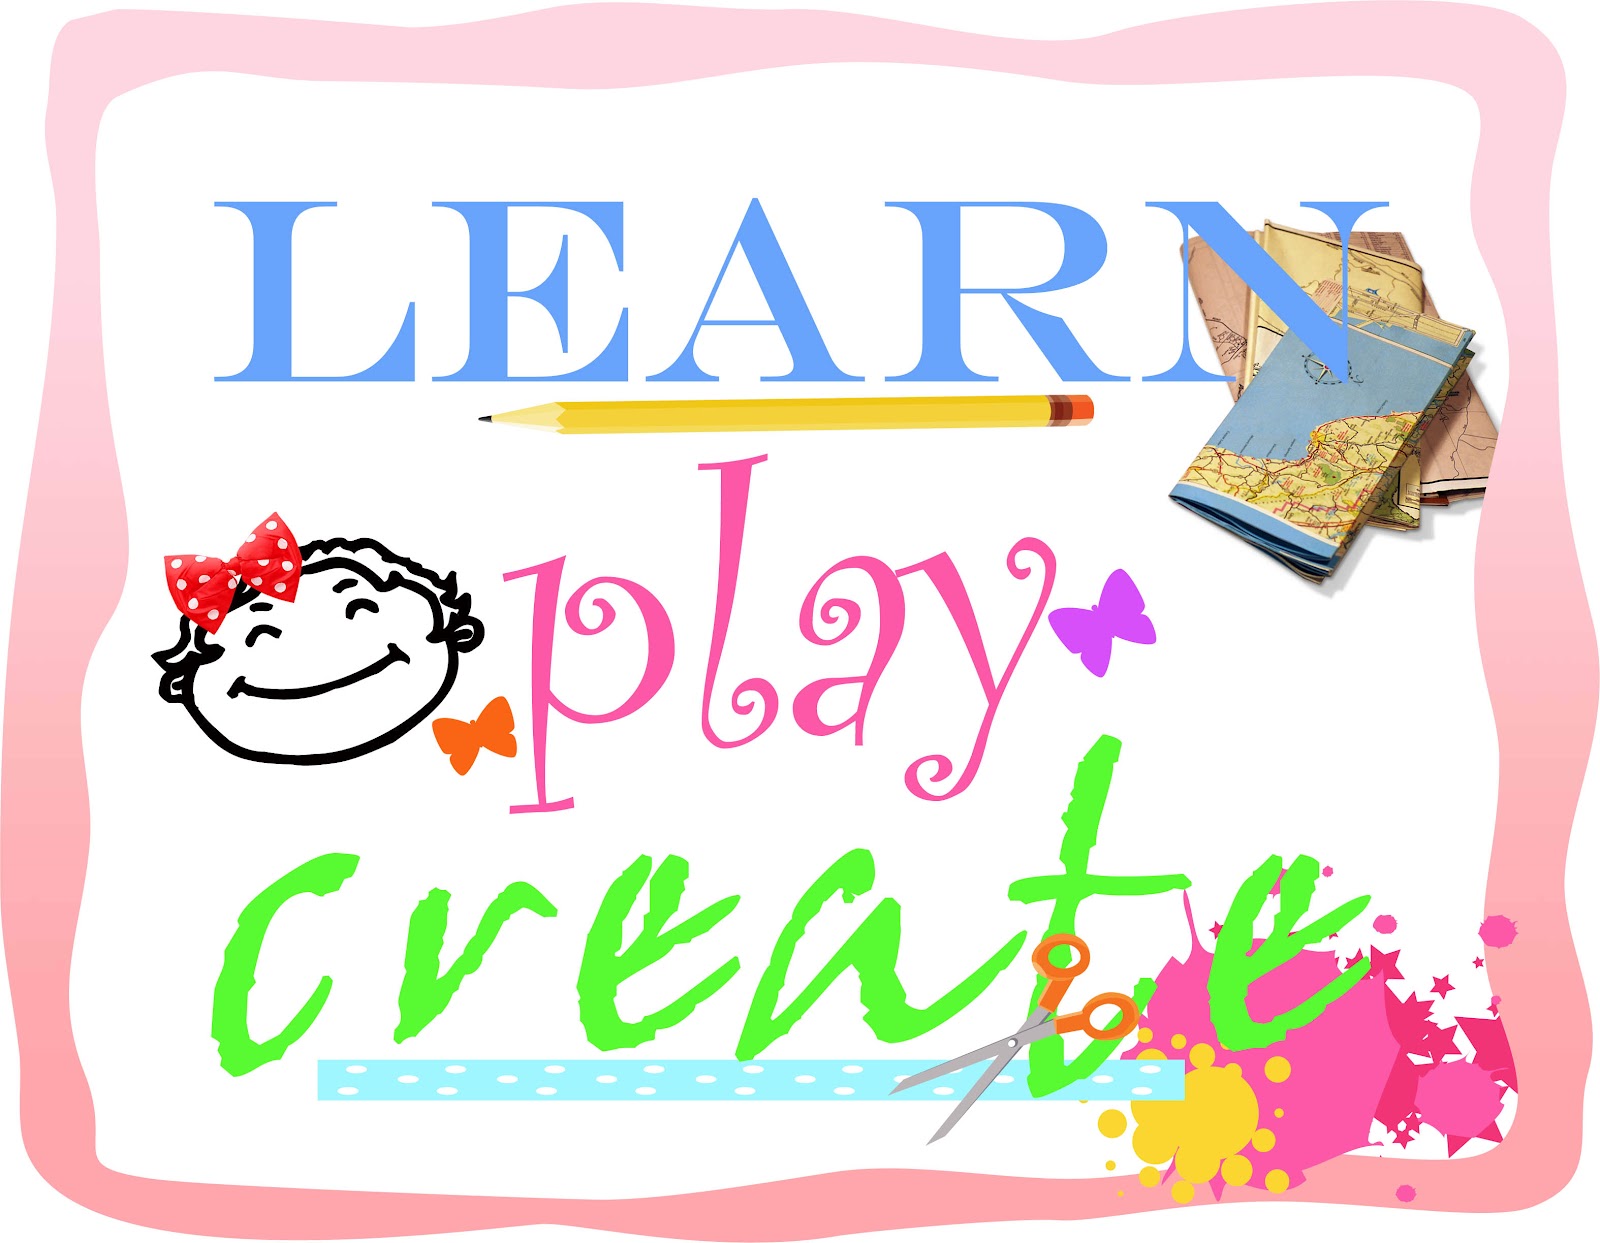 summer learning clipart - photo #2